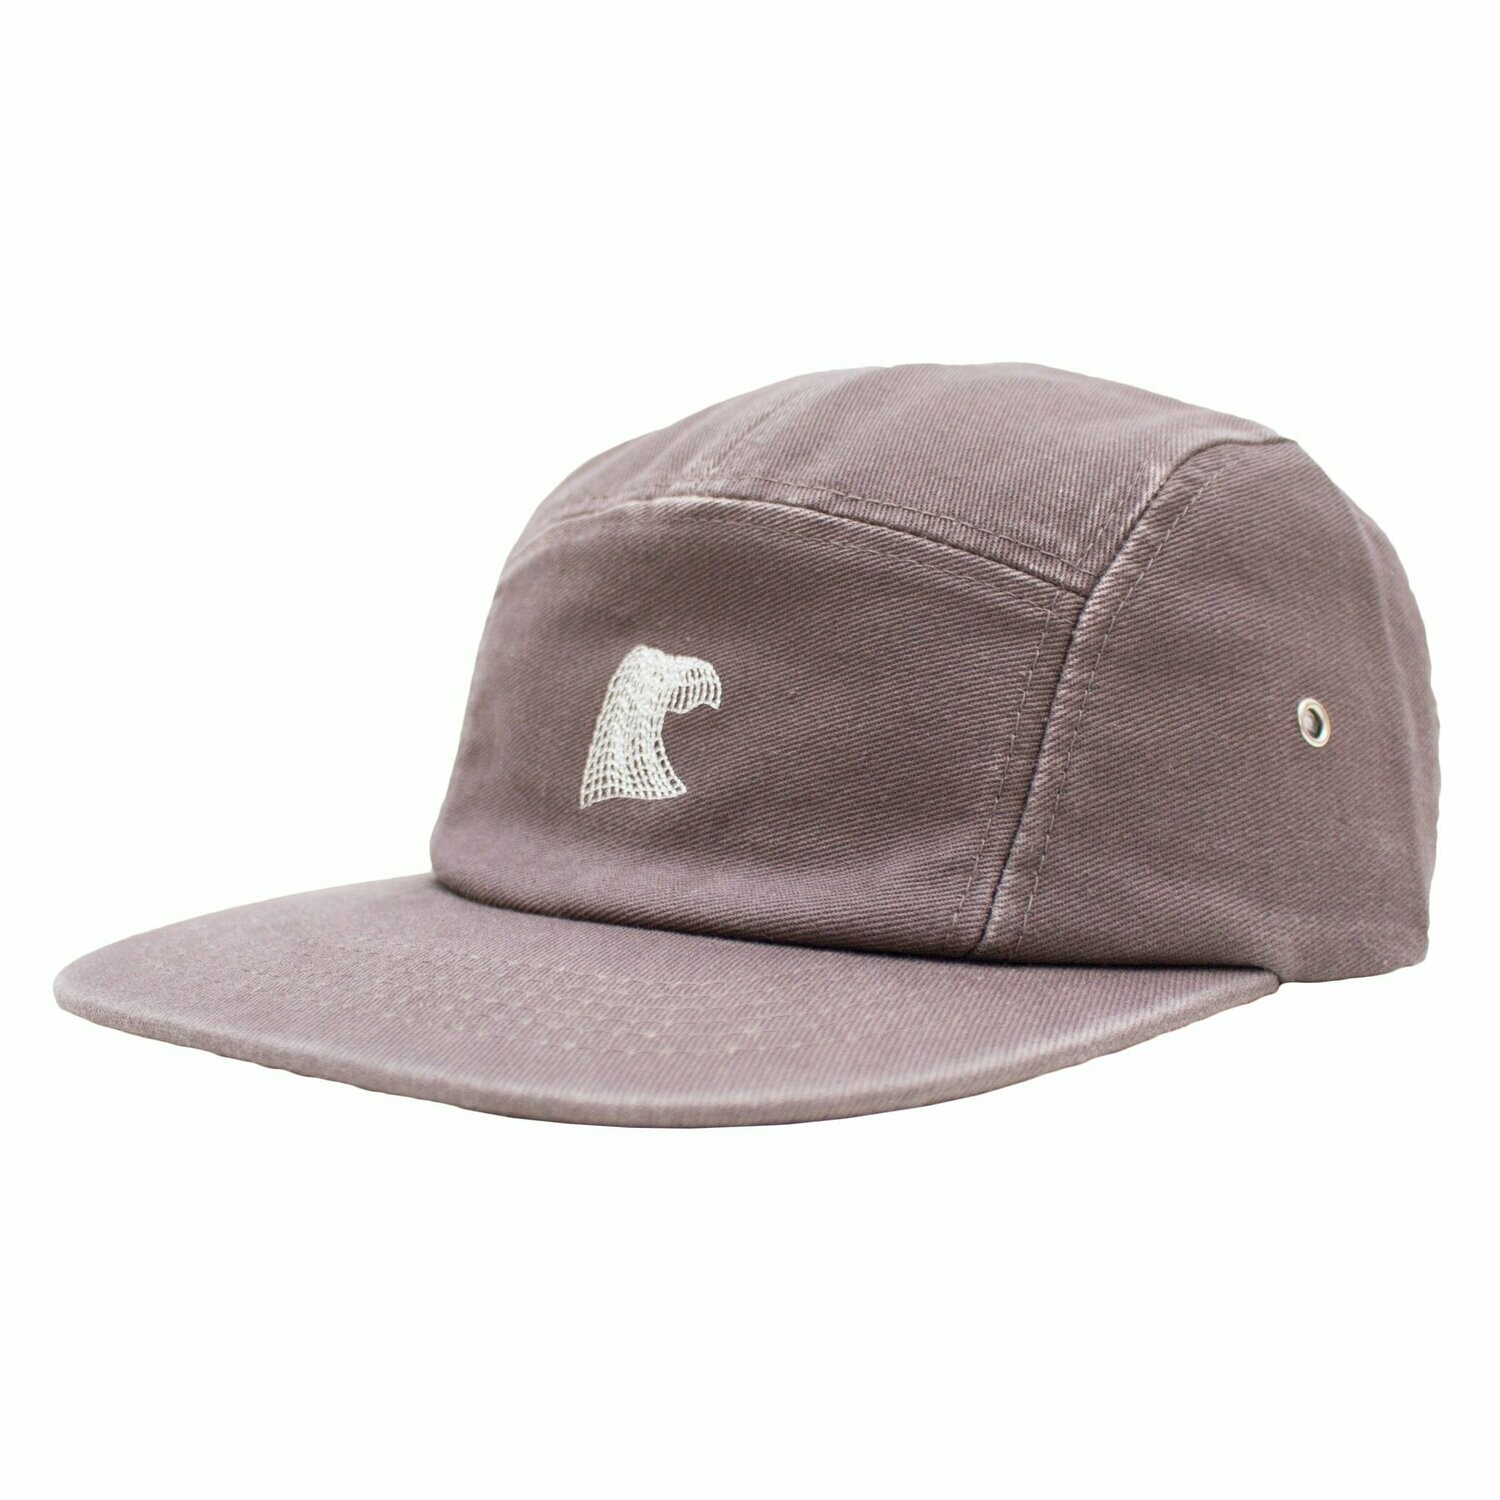 Digital Wave 5-Panel Camp Hat, Faded Gray